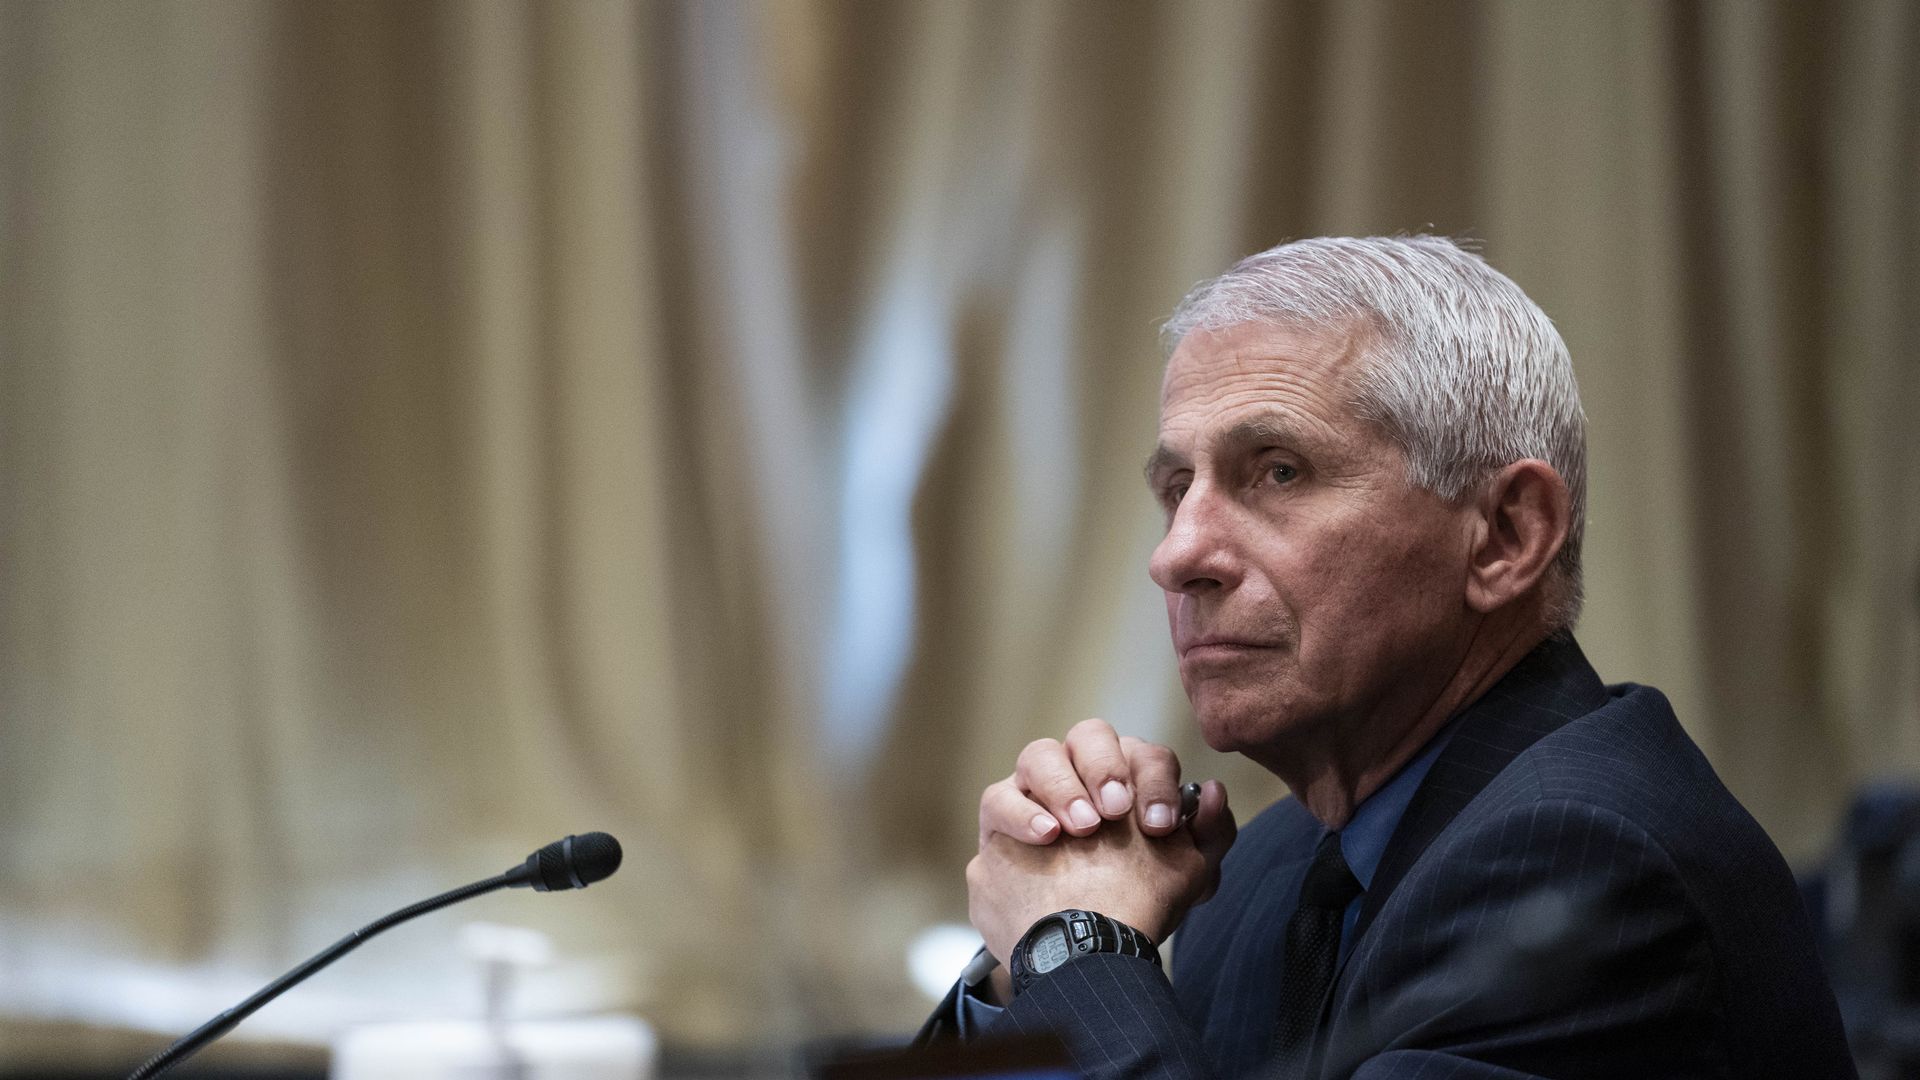 NIAID chief Anthony Fauci during a Senate hearing in Washington, D.C., U.S., on Wednesday, May 26